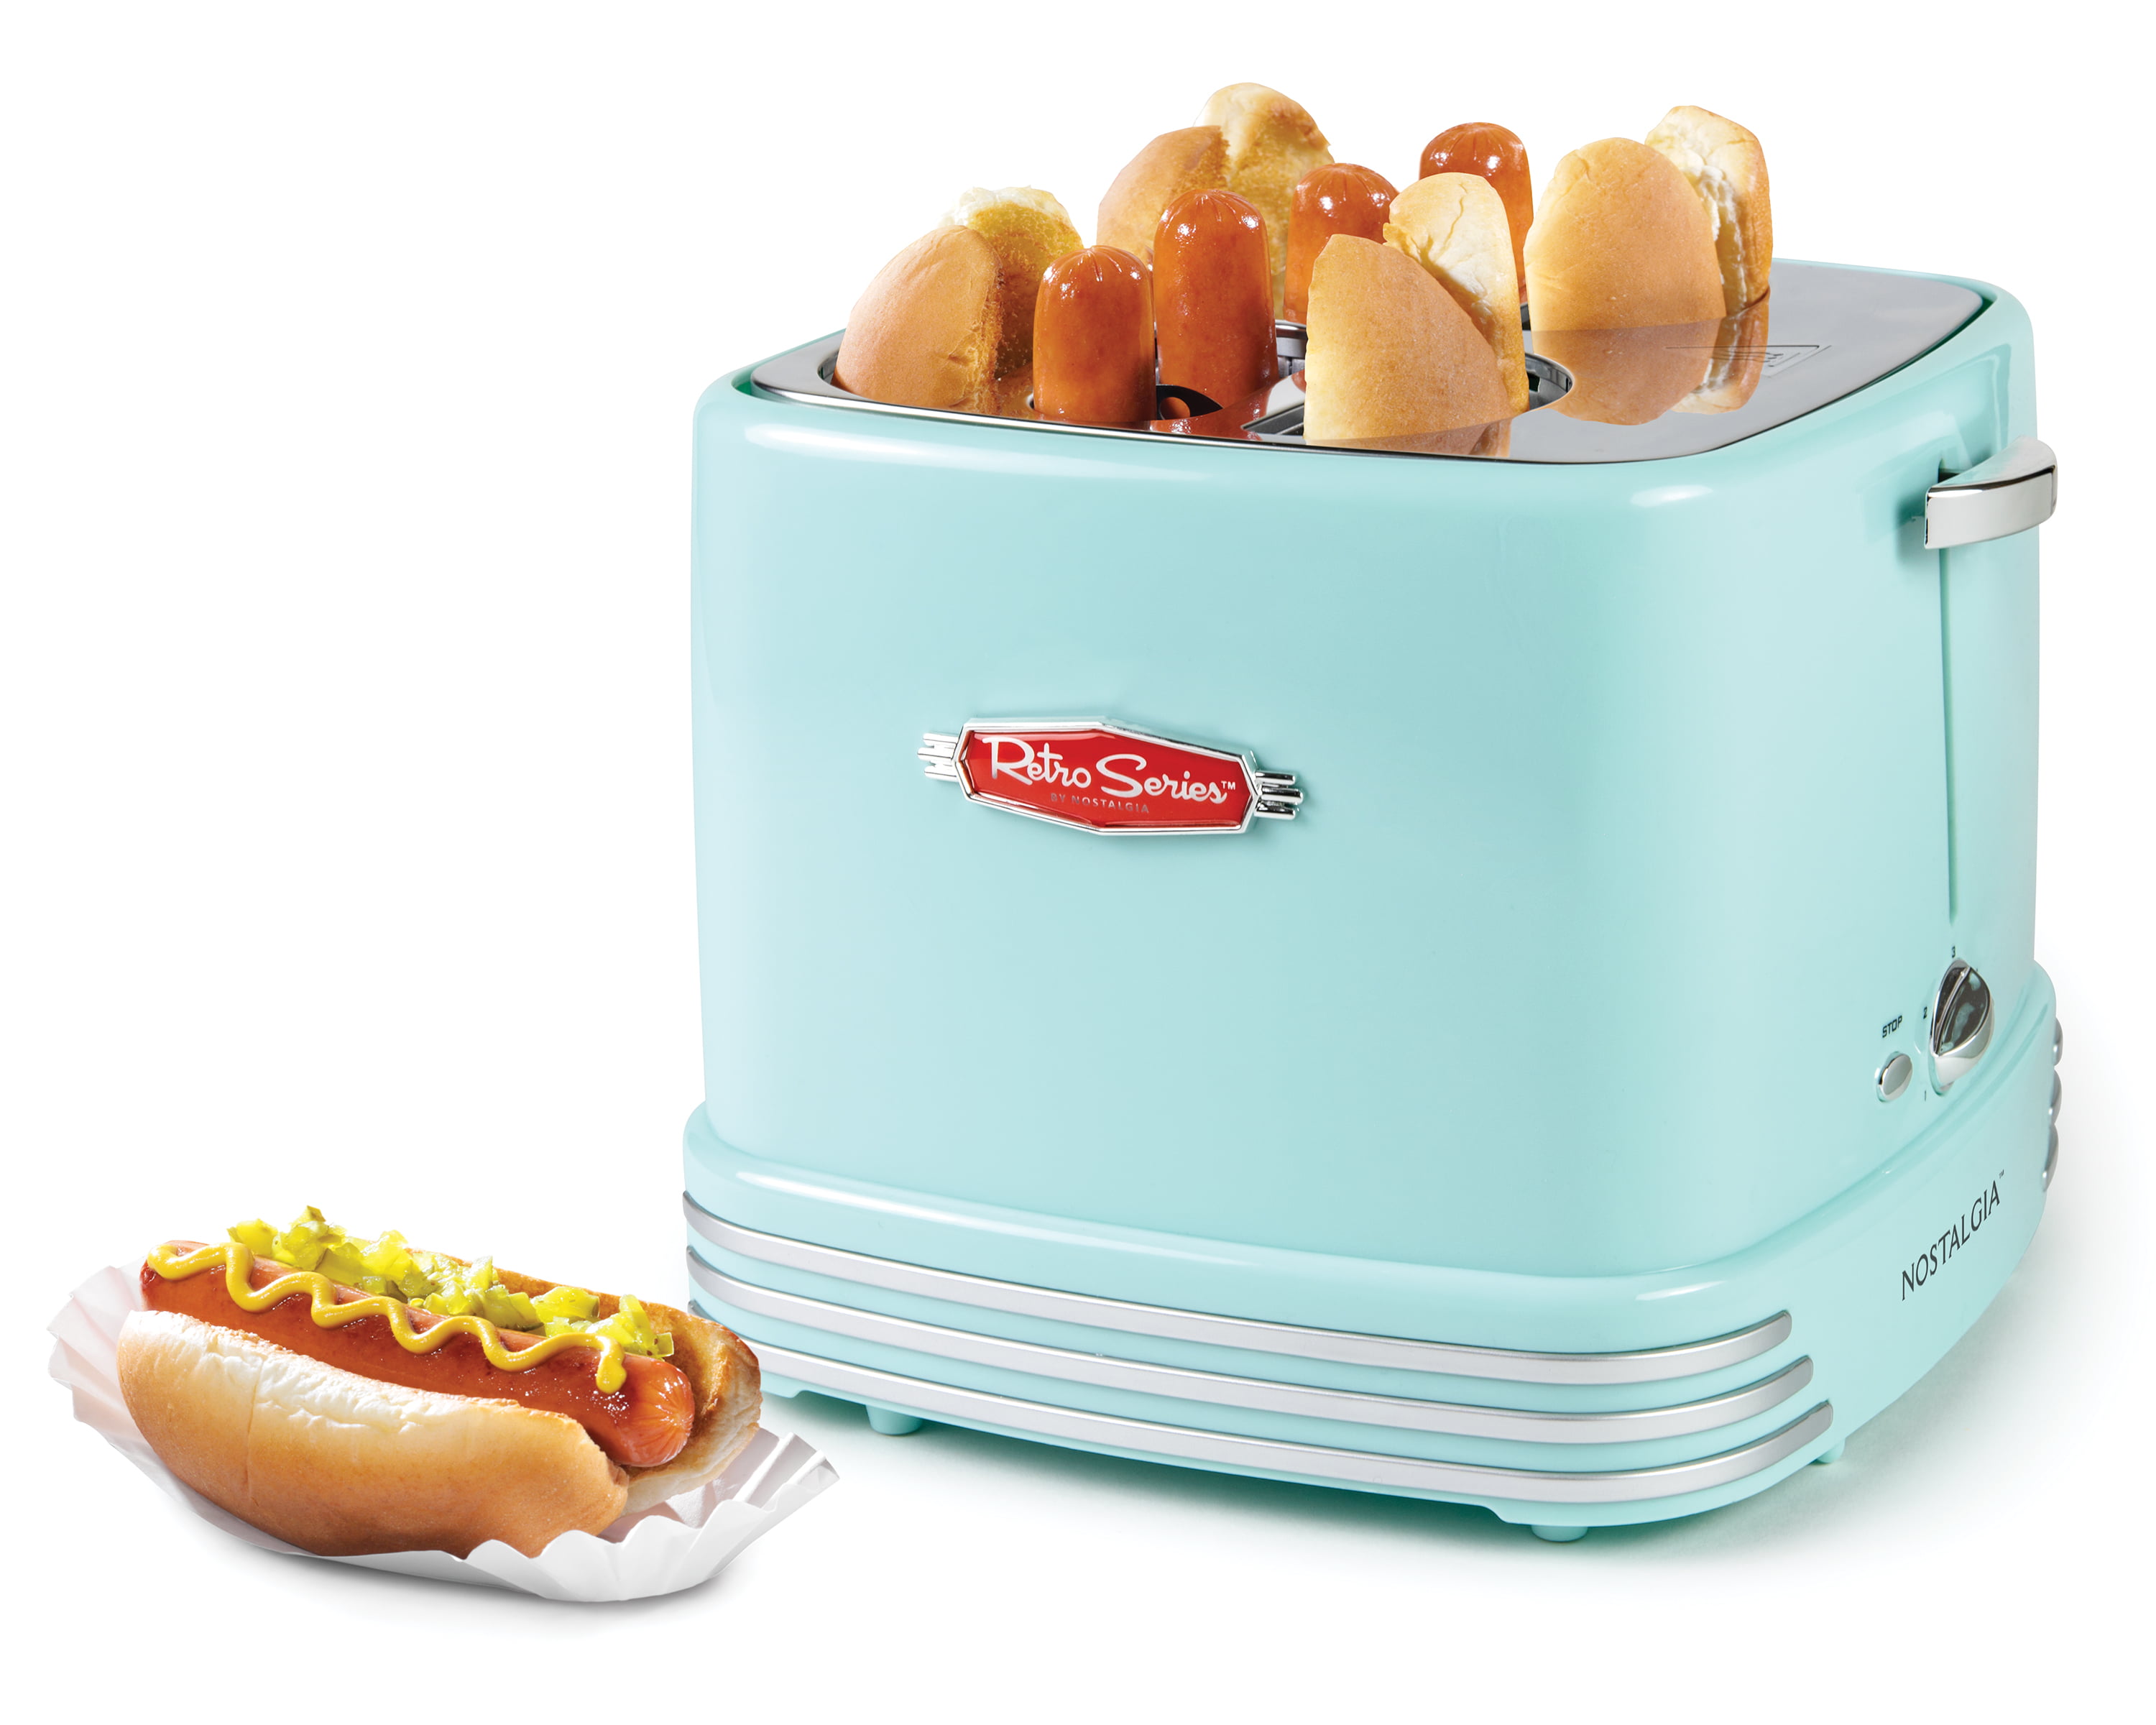 538W Hot Dog Machine Hot Dog & Bun Toaster Commercial Electric Hot